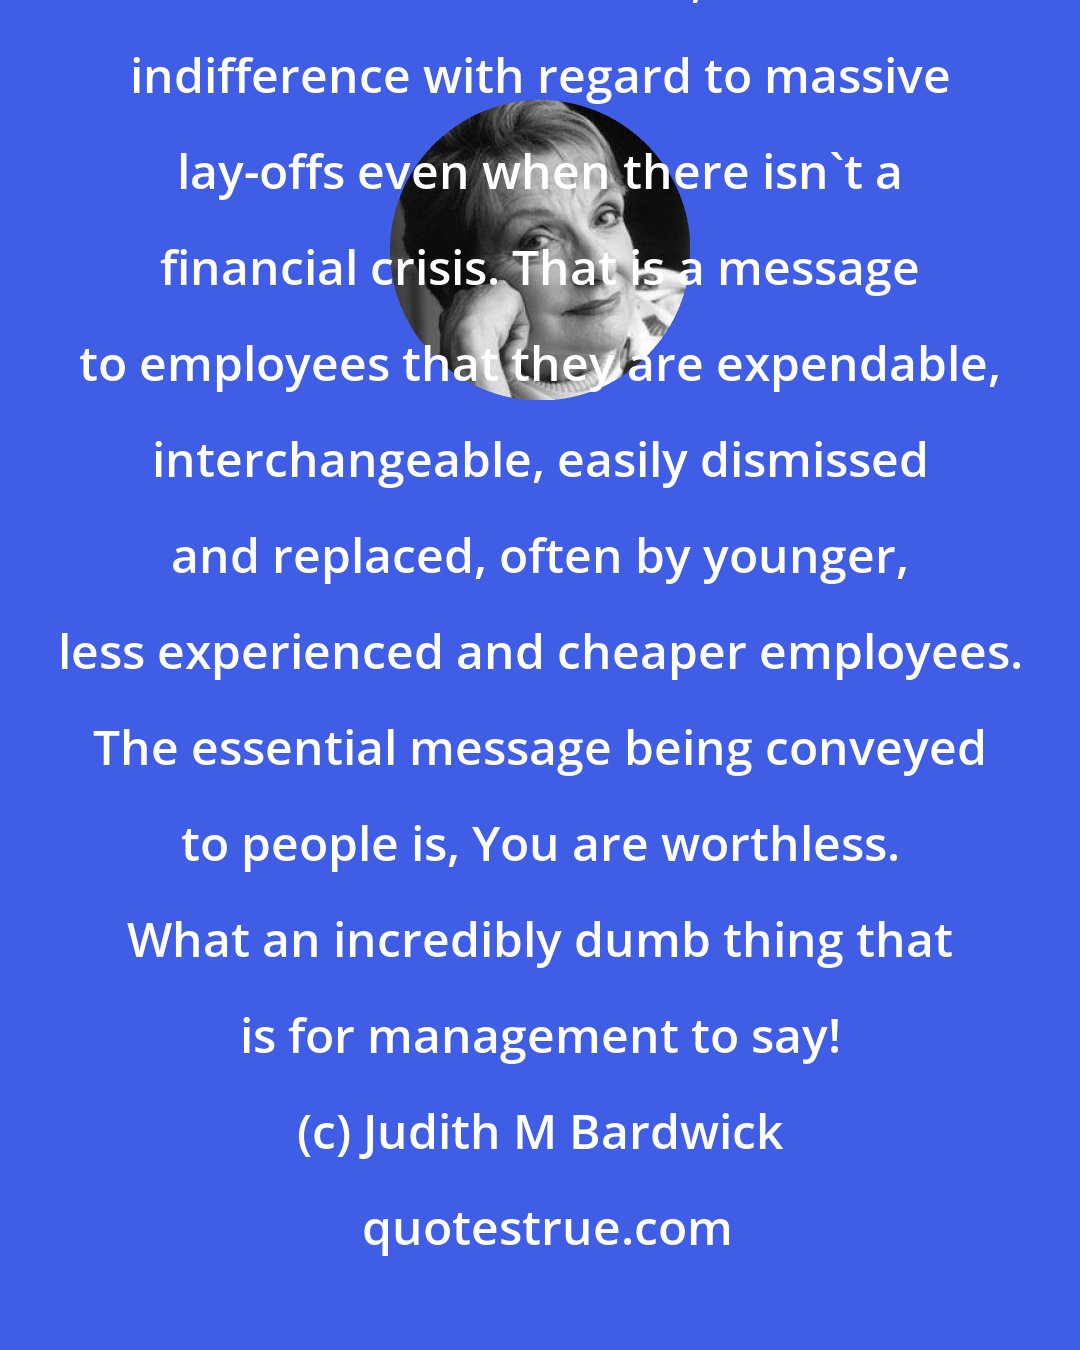 Judith M Bardwick: The best worst example of making people feel unappreciated today lies in the casualness, indeed indifference with regard to massive lay-offs even when there isn't a financial crisis. That is a message to employees that they are expendable, interchangeable, easily dismissed and replaced, often by younger, less experienced and cheaper employees. The essential message being conveyed to people is, You are worthless. What an incredibly dumb thing that is for management to say!